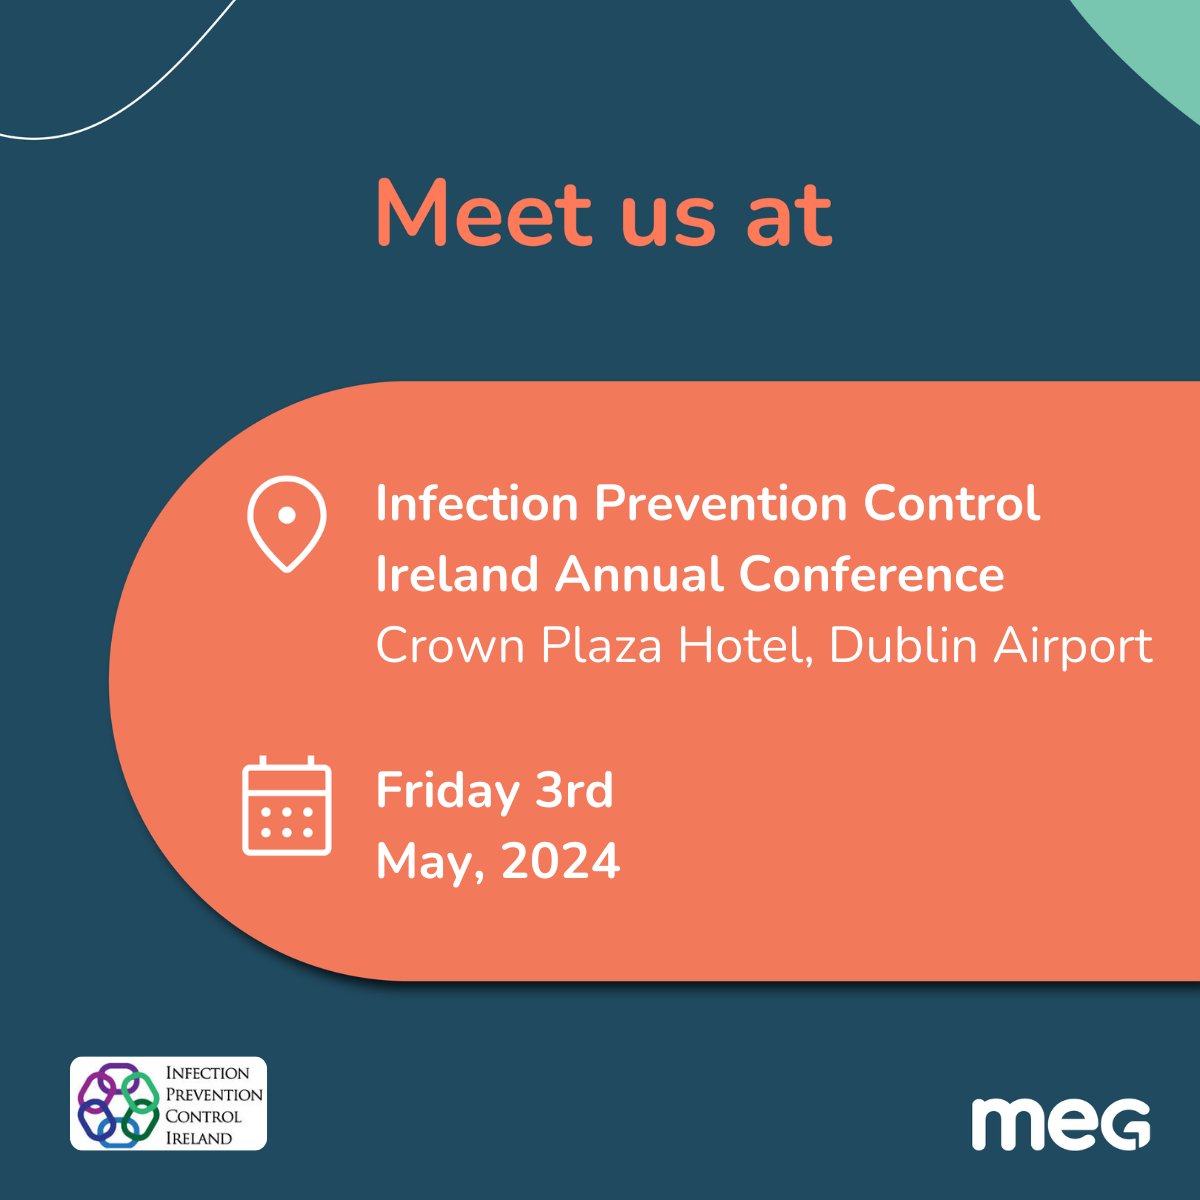 We hope to see many of you at the IPCI Annual Conference. If you're not already using MEG for Infection Prevention & Control Audits, stop by our stand & see why so many #IPC departments around Ireland & the world, love using MEG! We simplify the process & refine the results🌟